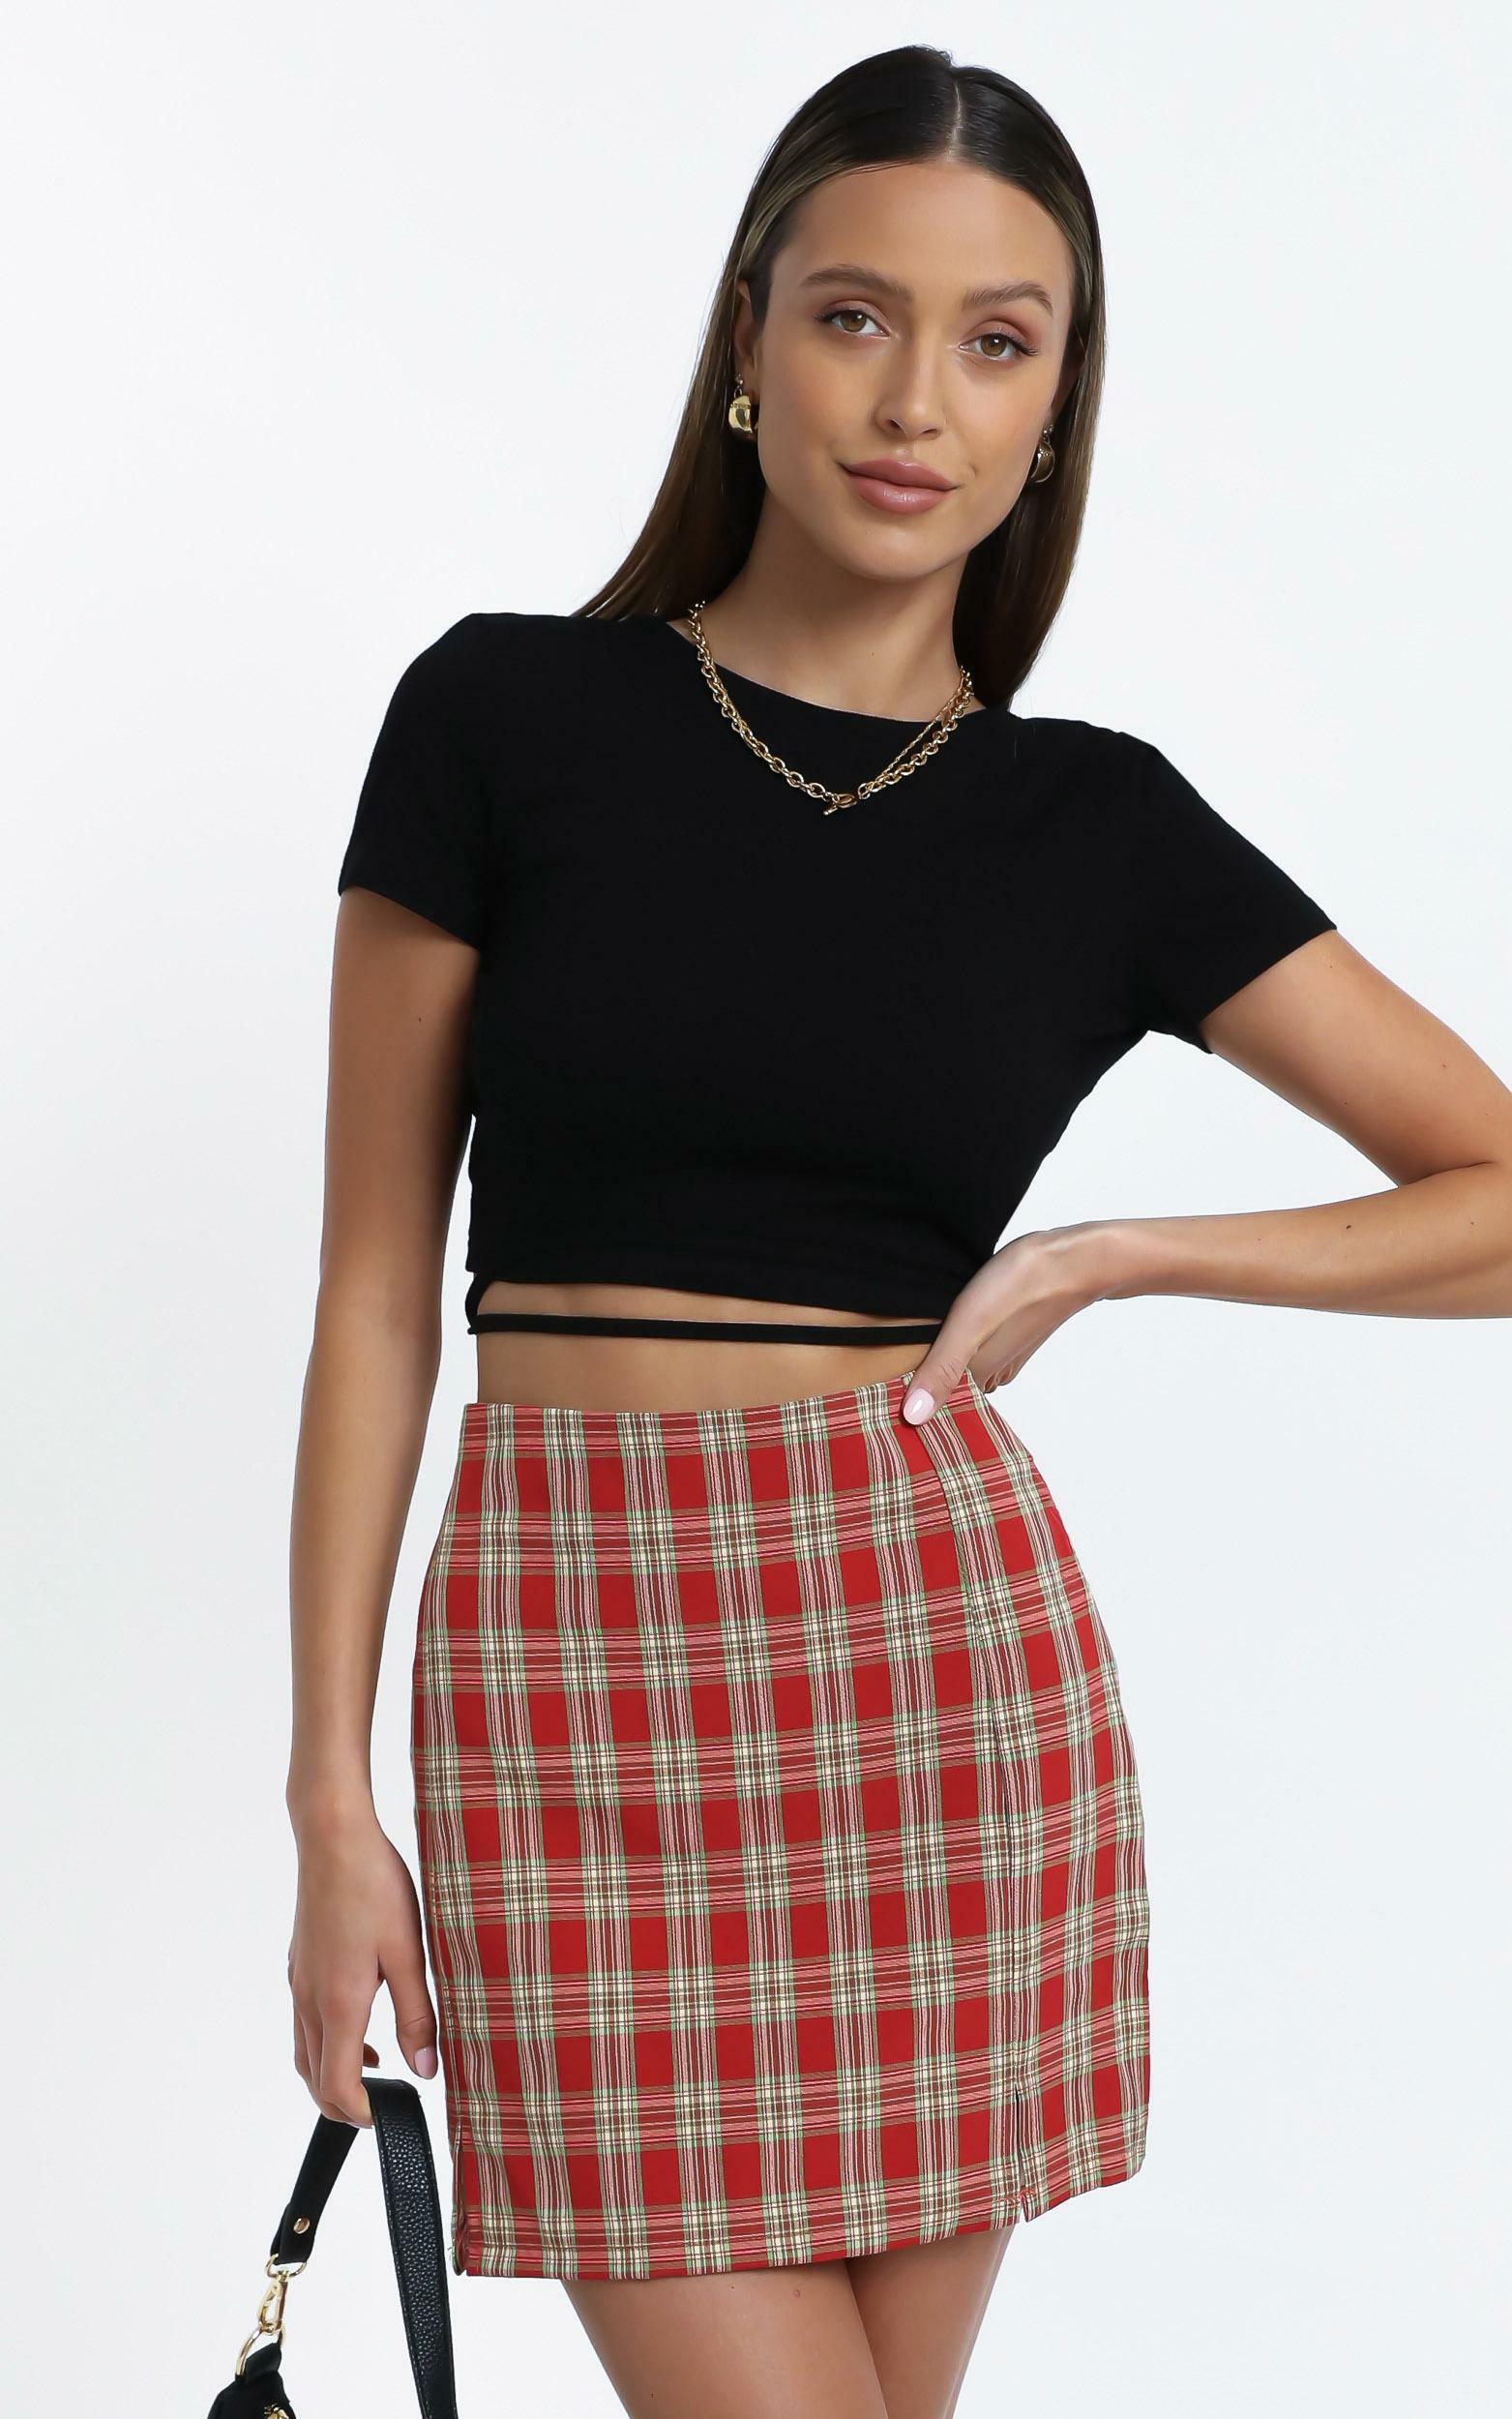 Jana Skirt in Red Check - 12 (L), Red, hi-res image number null